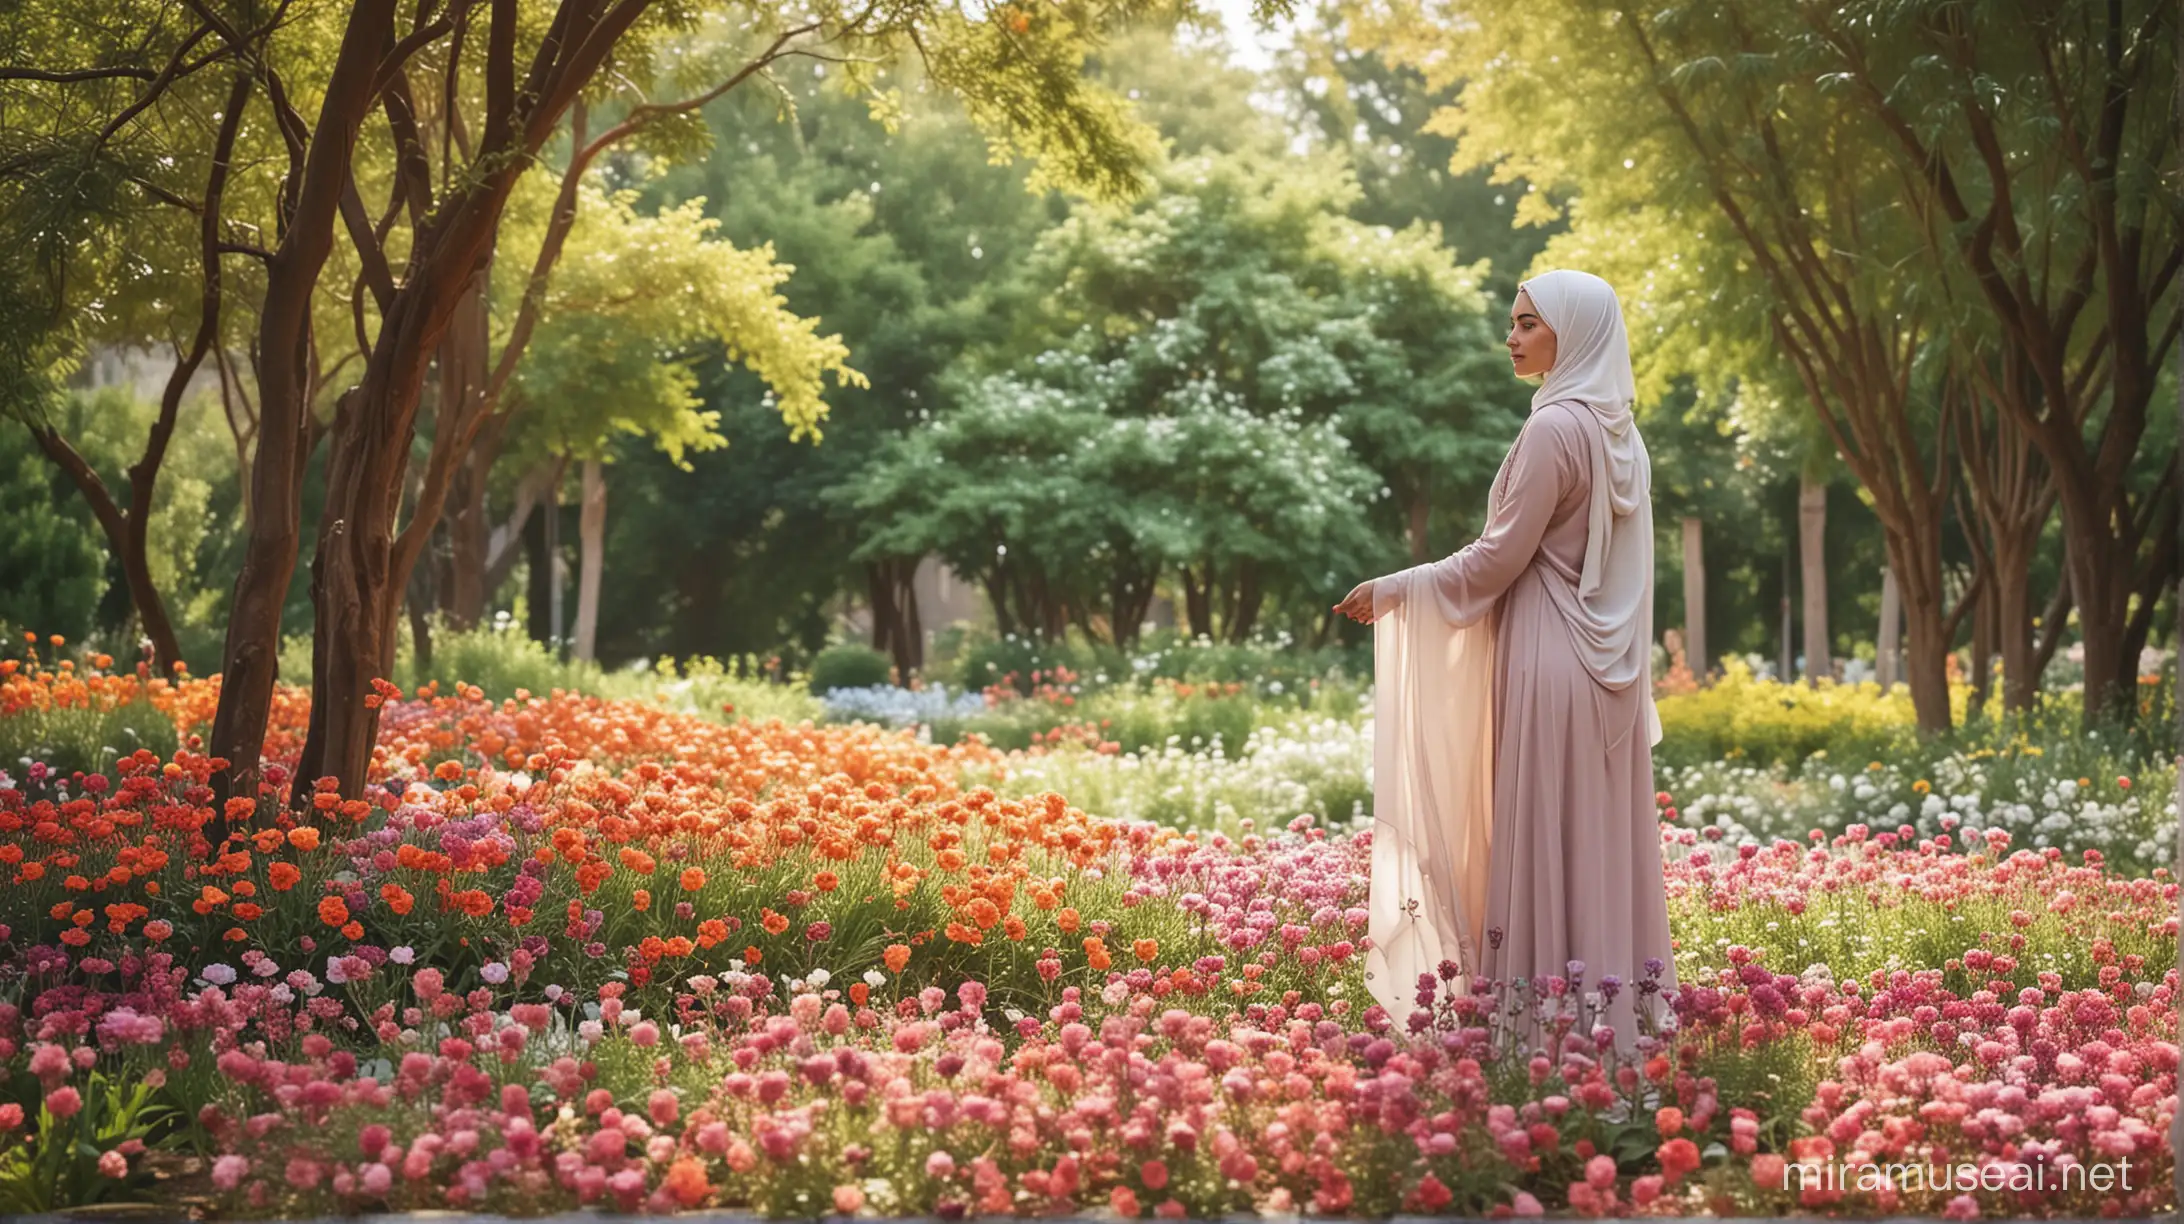 "Capture the serenity of a Muslim girl, adorned in her hijab, standing gracefully amidst a breathtaking garden. As she gazes into the distance, allow the vibrant colors of nature to frame her tranquil presence, echoing the harmony between her inner peace and the beauty that surrounds her